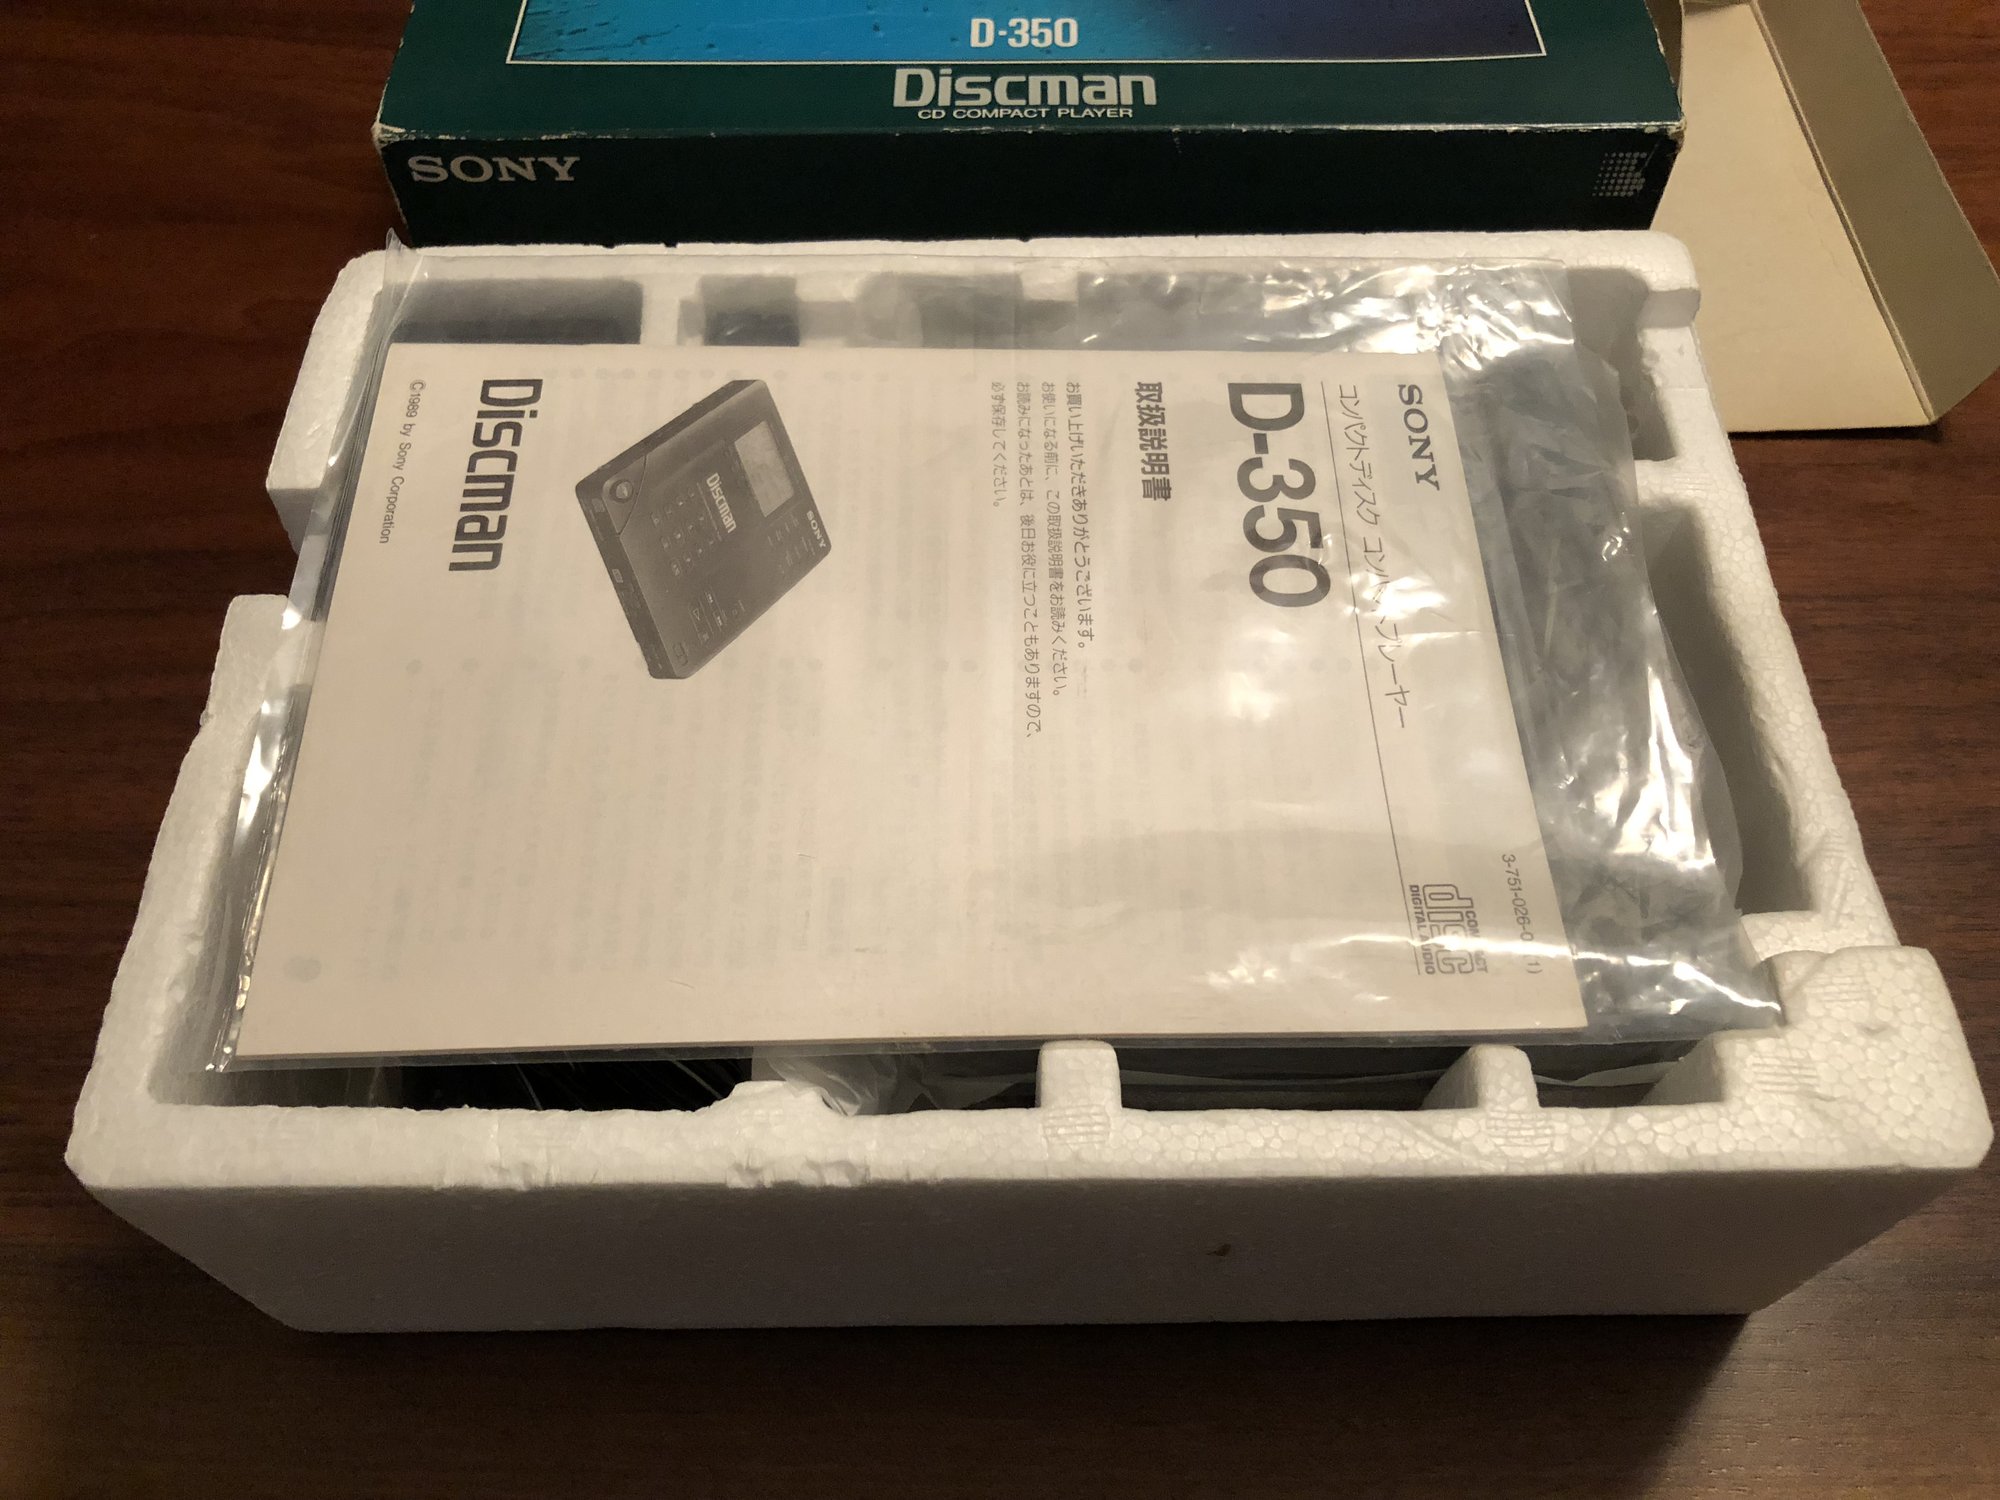 Sony D-350 Unboxing | Stereo2Go forums